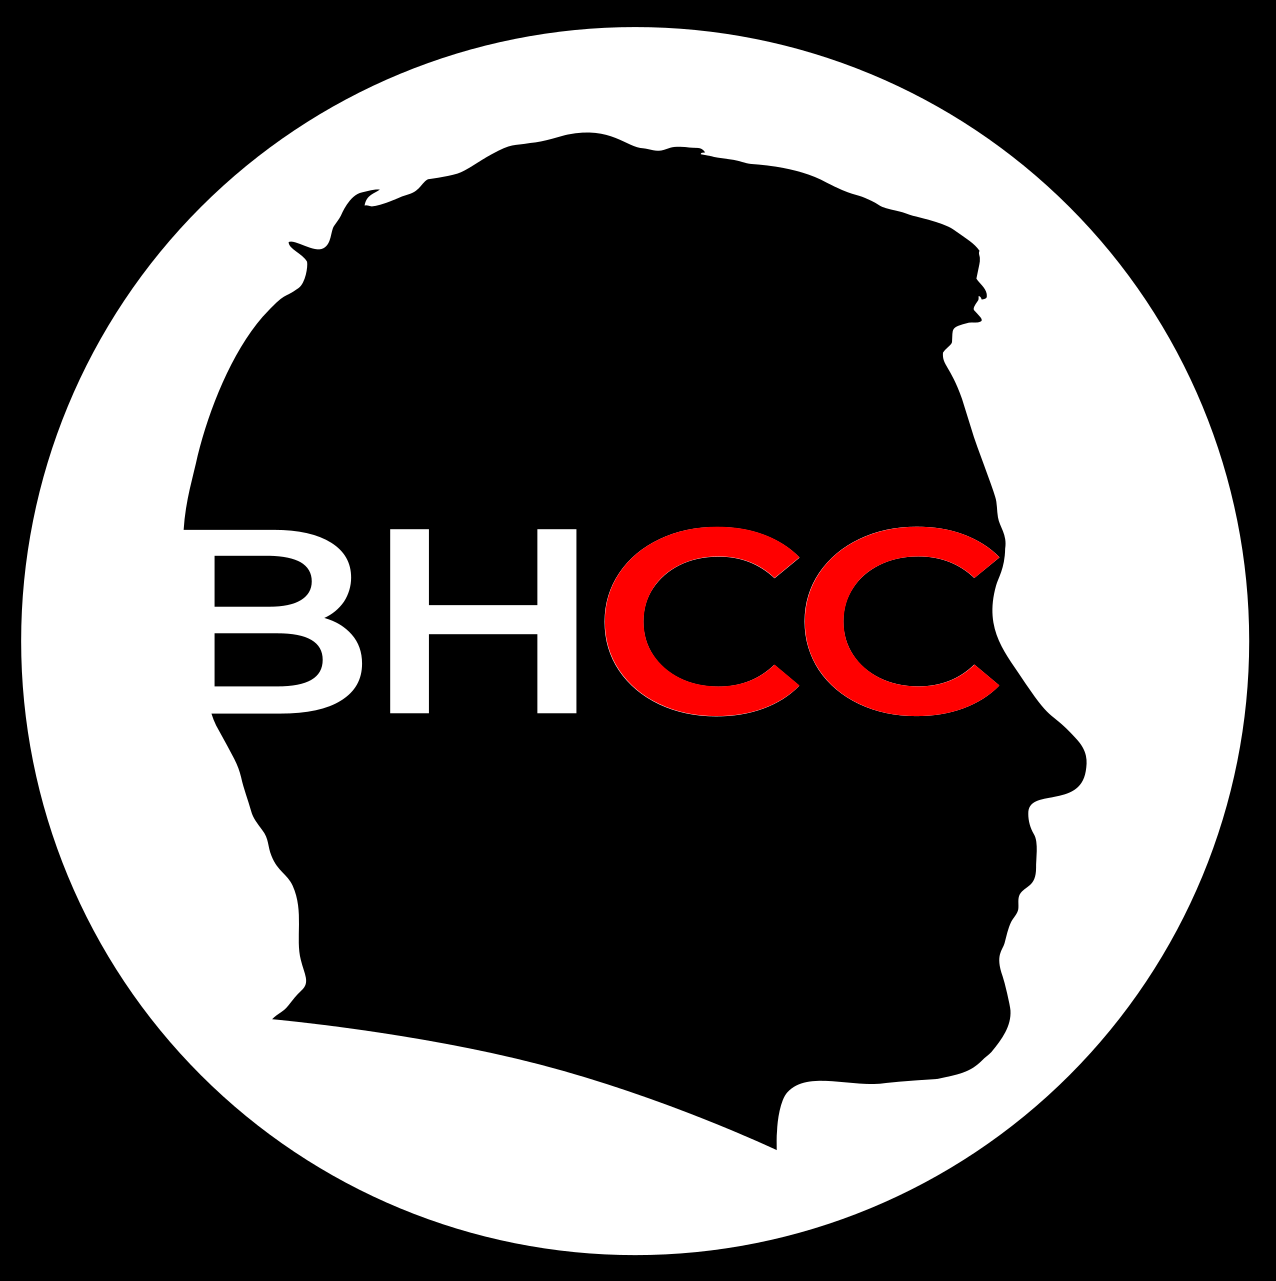 BHCC 2022 (4th Symposium on Biases in Human Computation and Crowdsourcing)